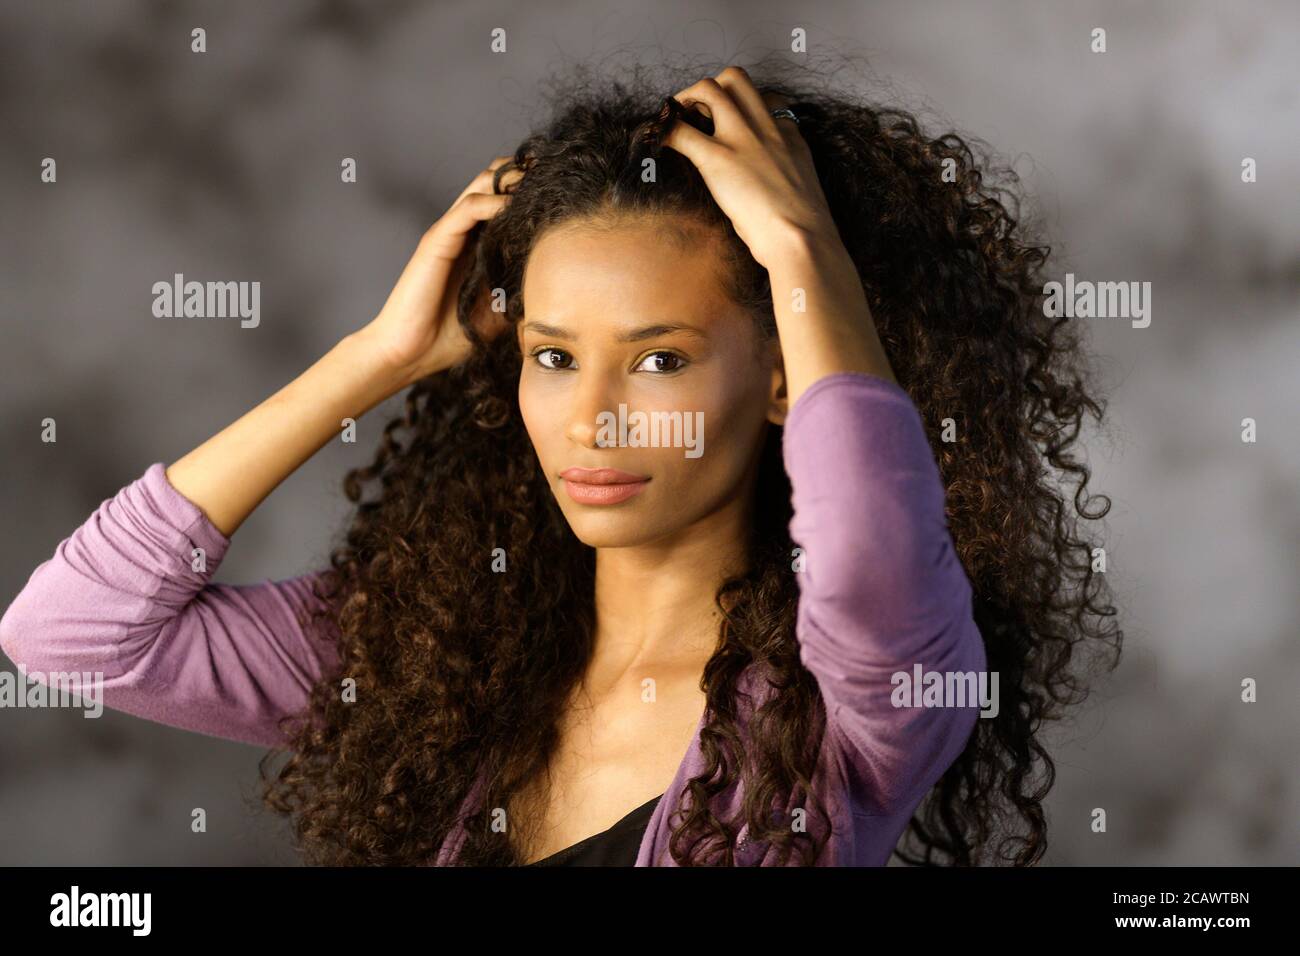 Cute attractive Afro American girl touching her long luxurious thick curly black hair with her hands as she turns to look at the camera Stock Photo